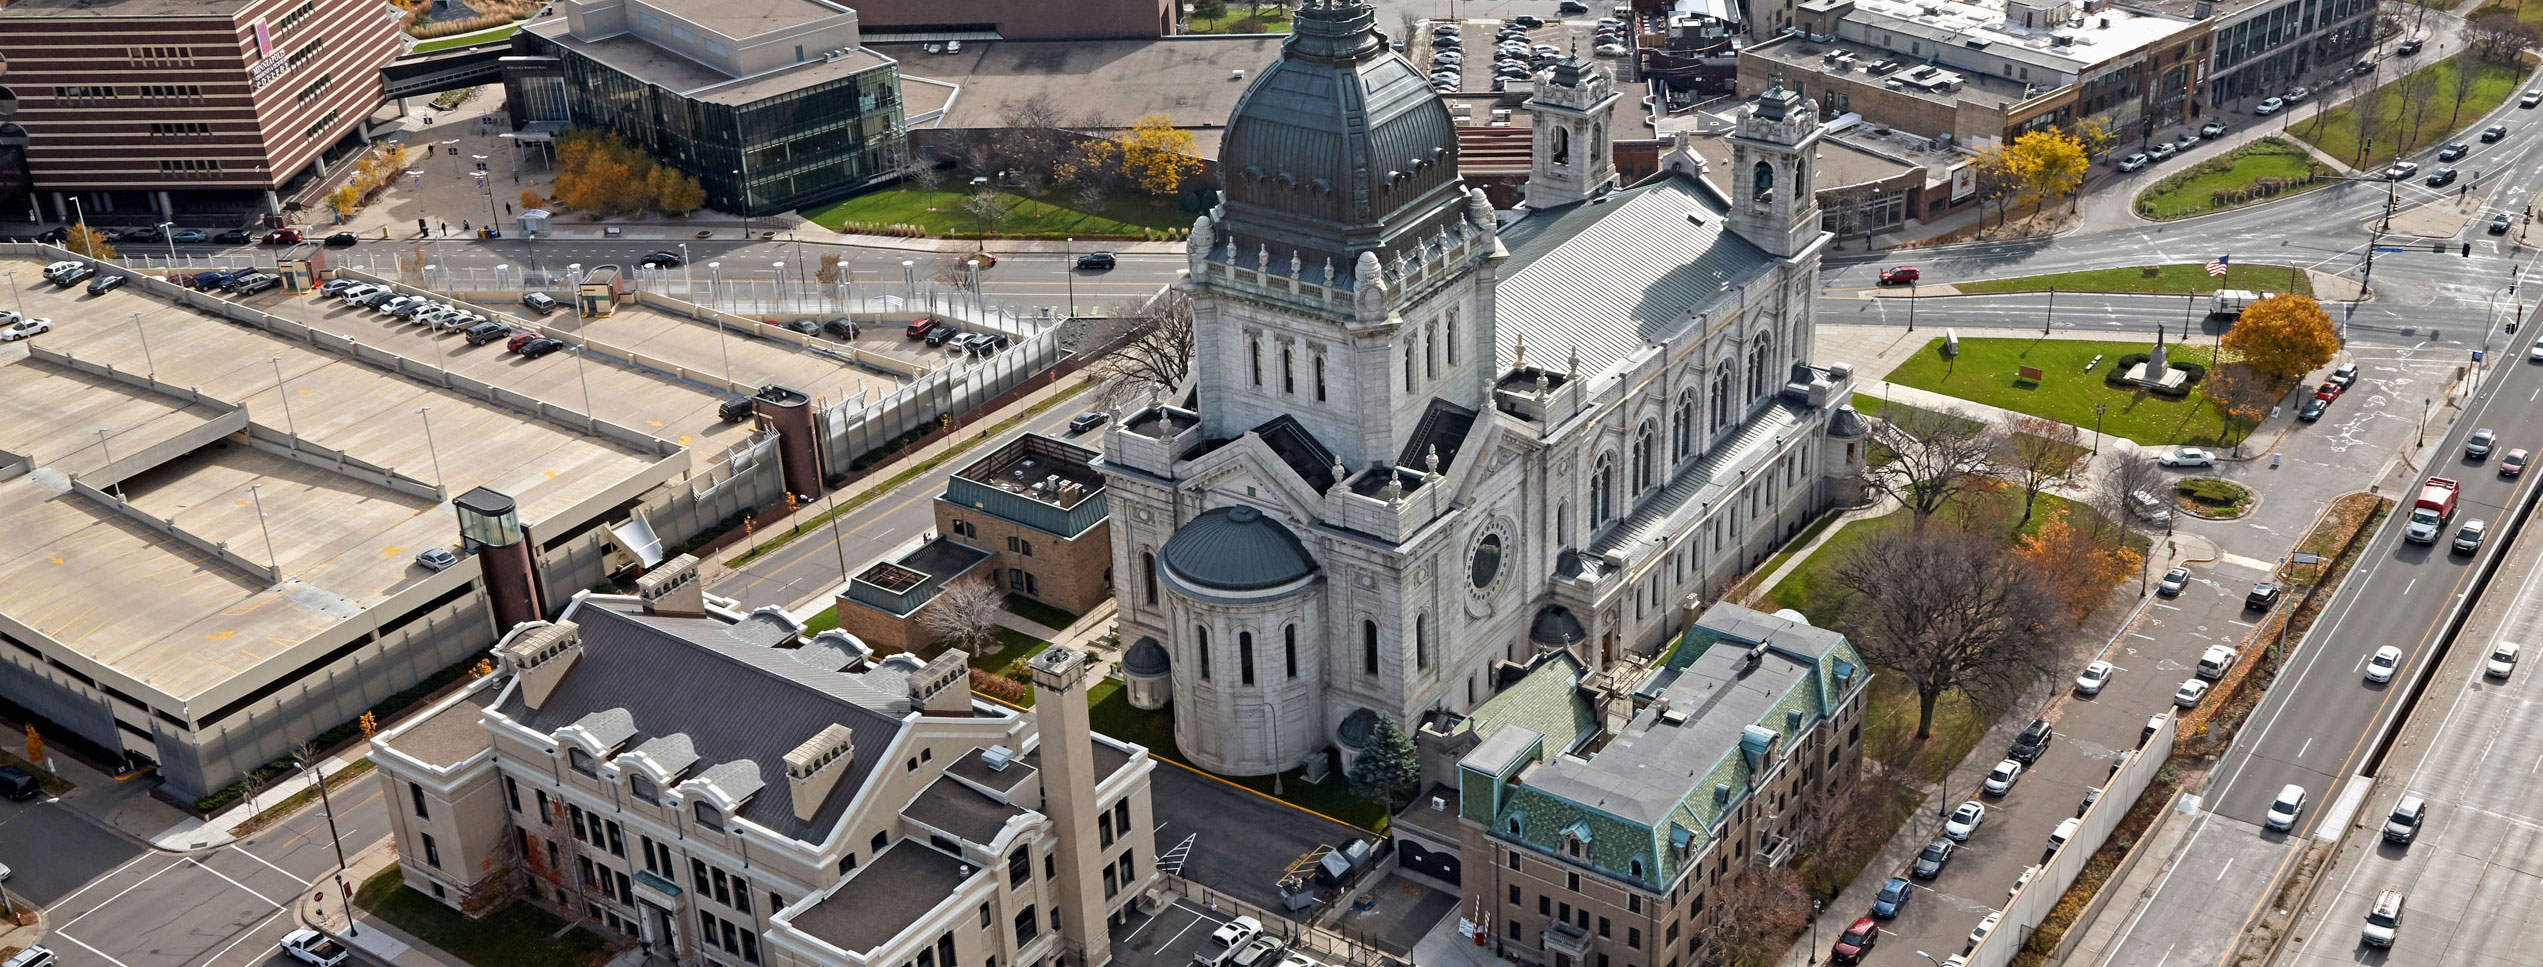 aerial view of Basilica of St. Mary 